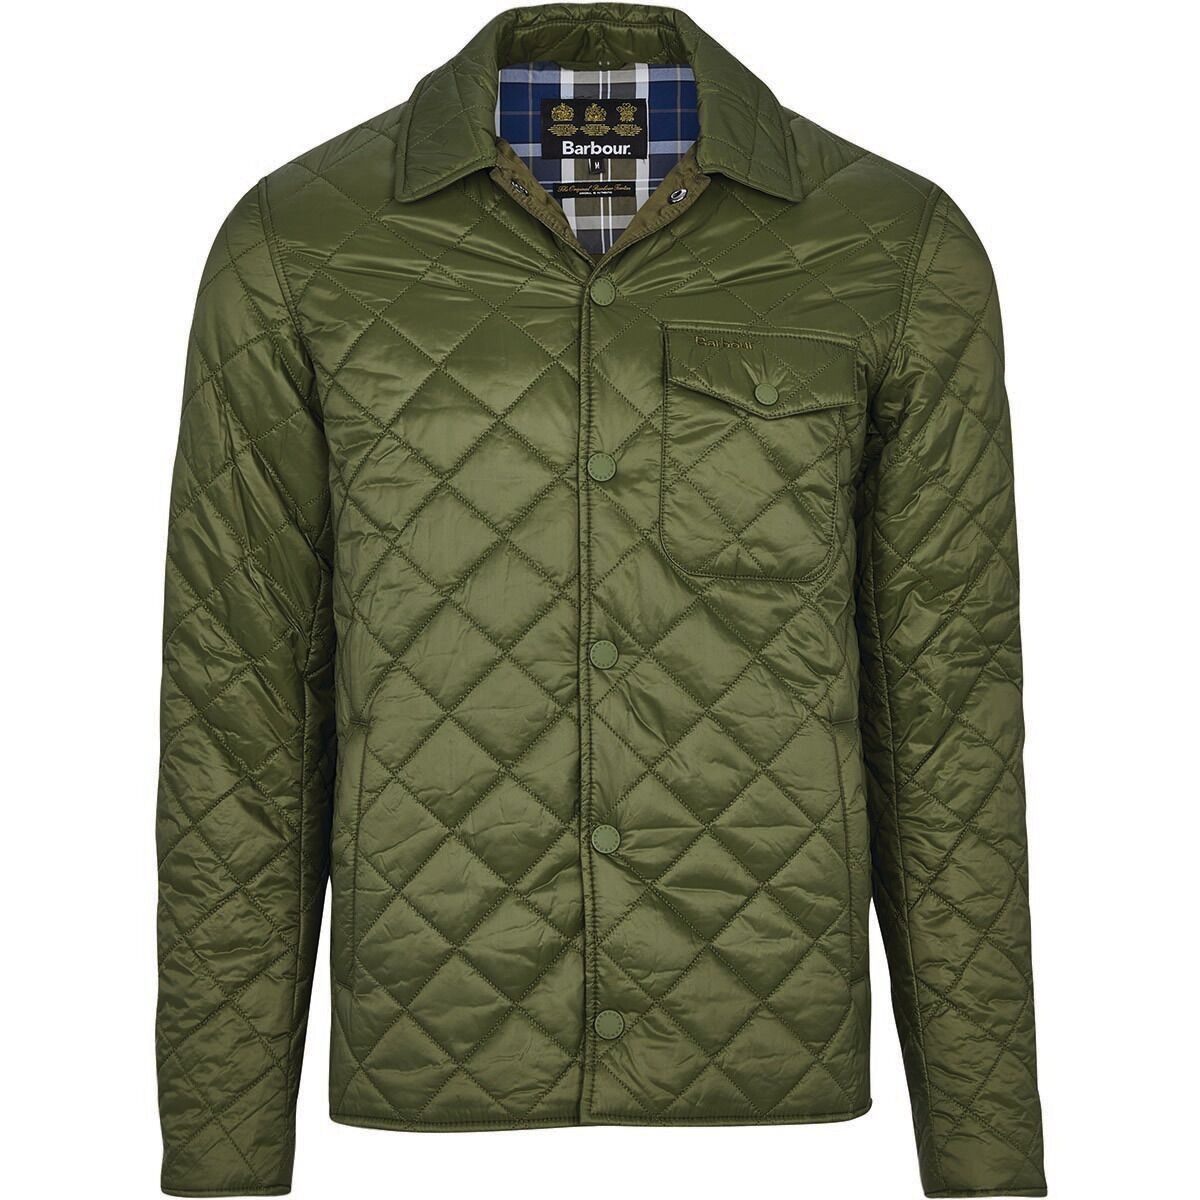 Barbour Tember Quilted Jacket - Men's - Clothing